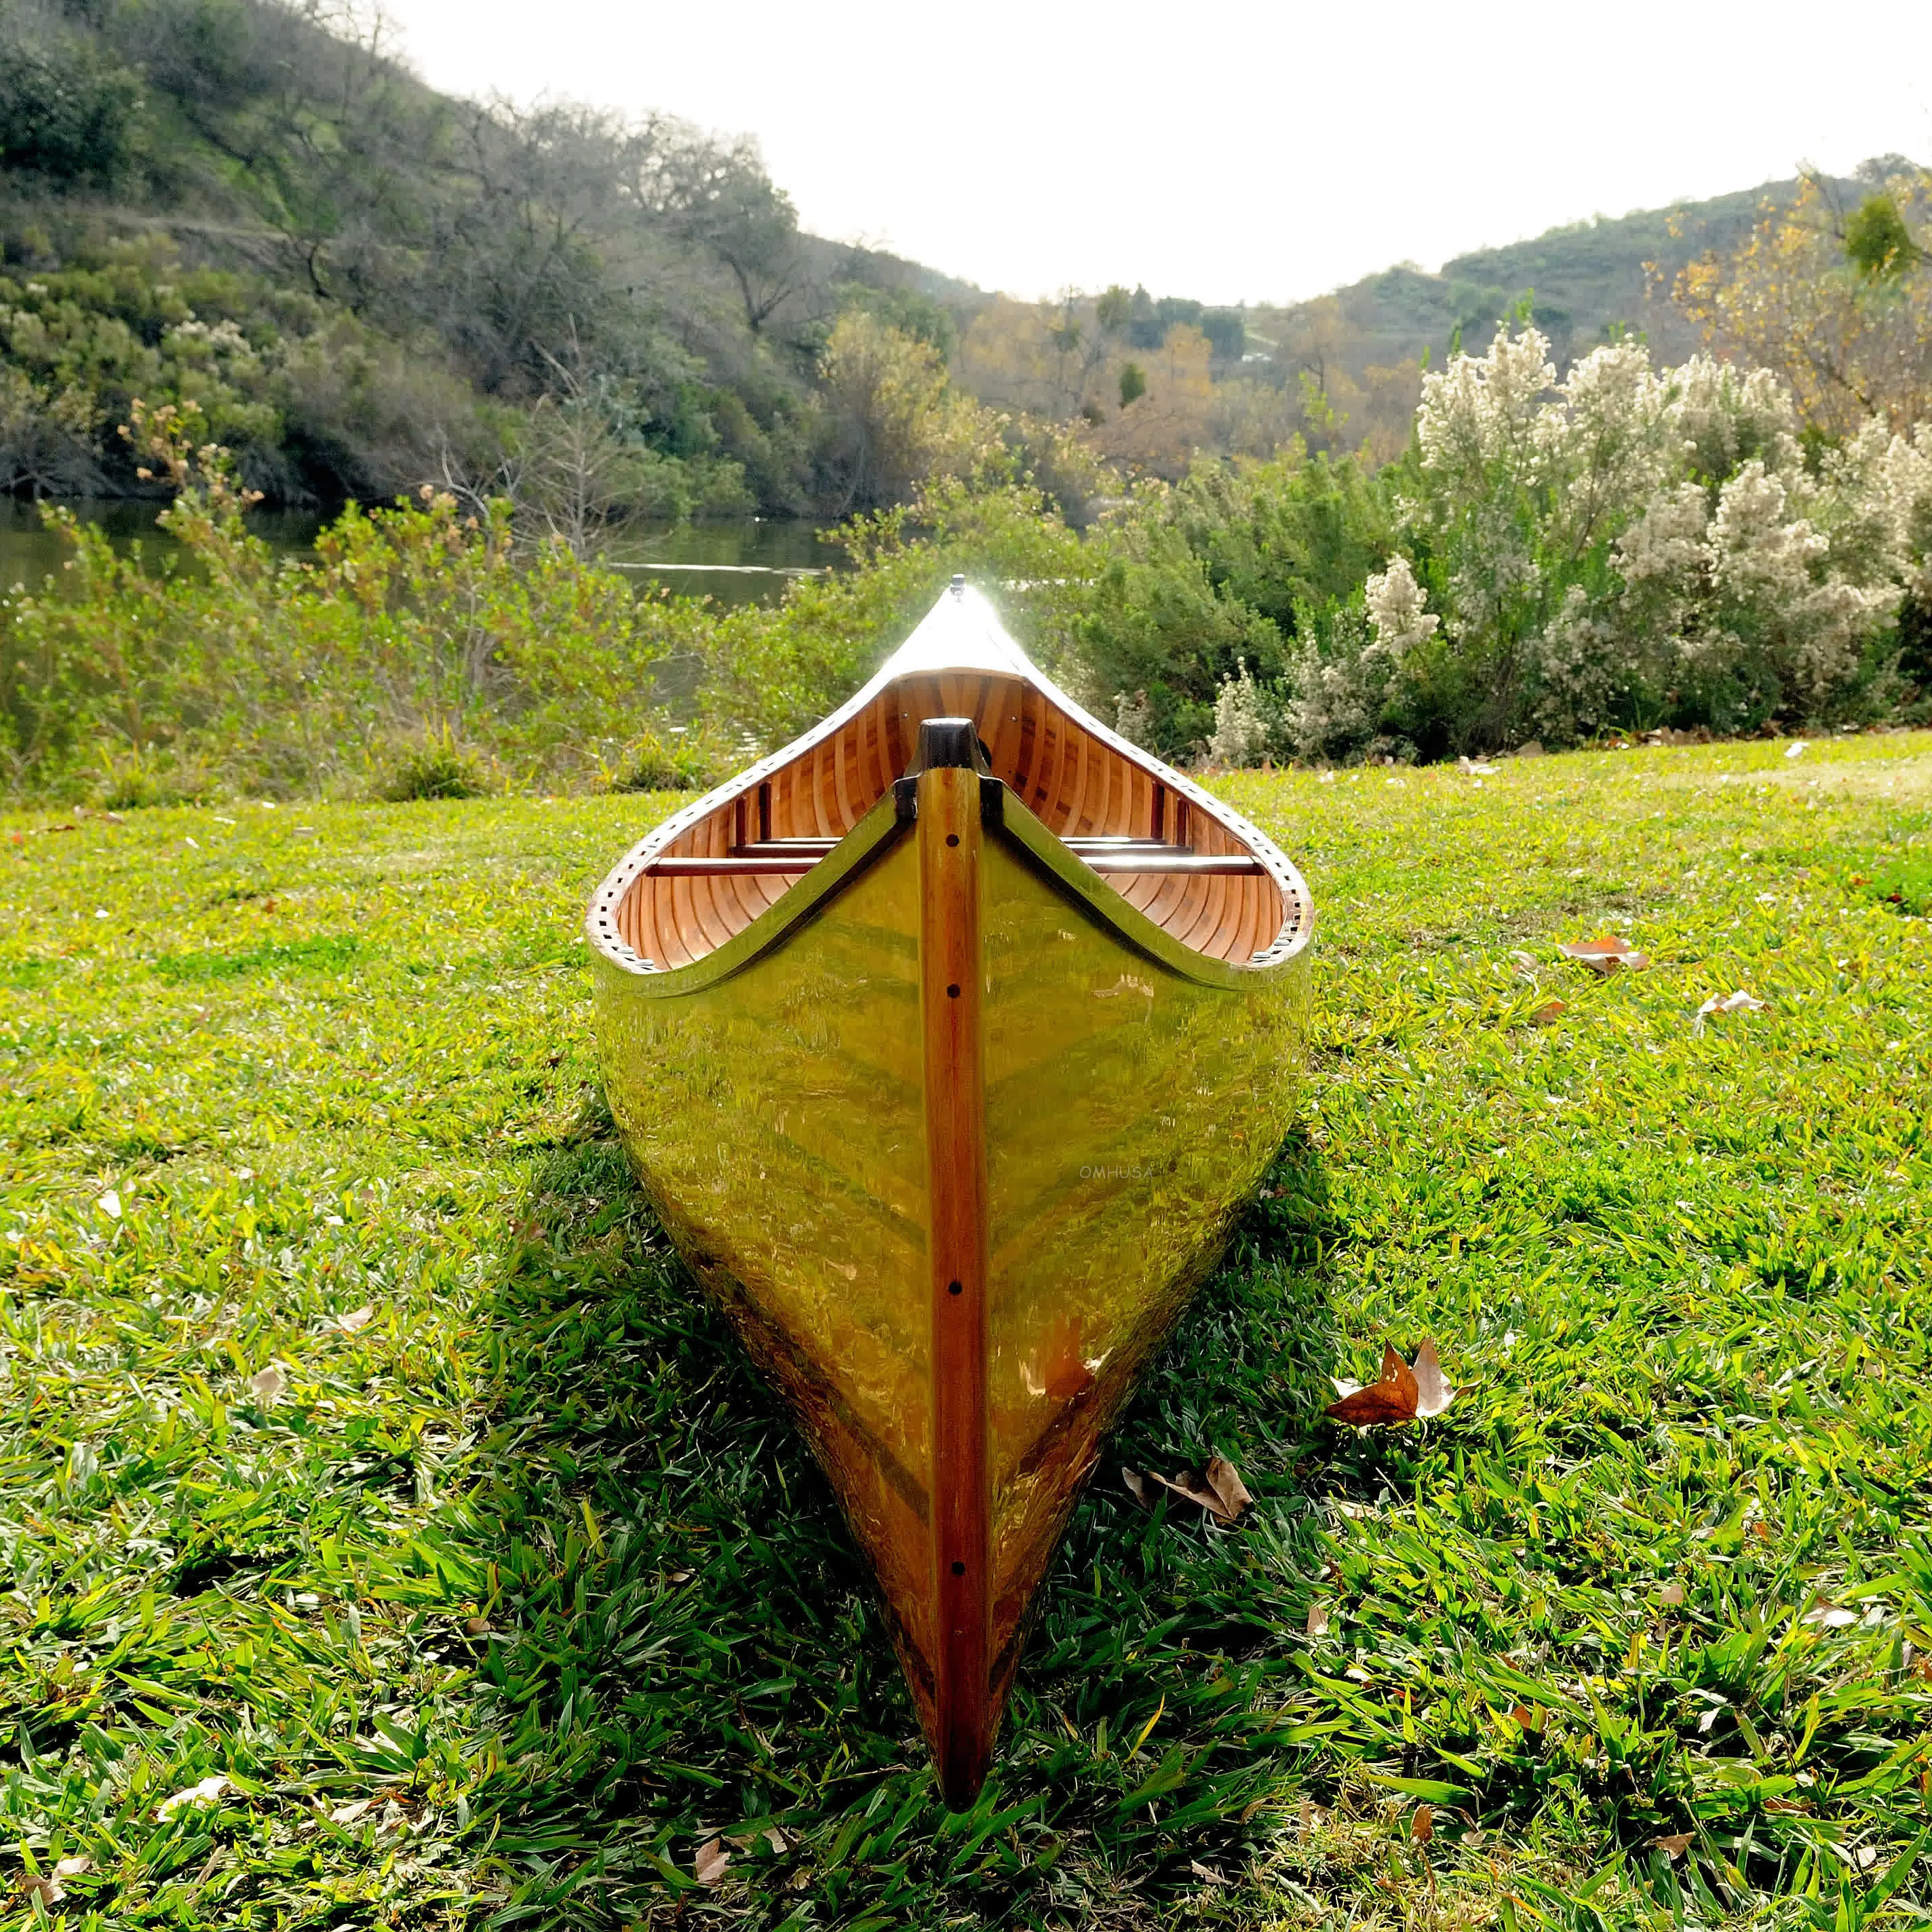 K013 Wooden Canoe with Ribs 18 ft K013 WOODEN CANOE WITH RIBS 18 FT L00.WEBP